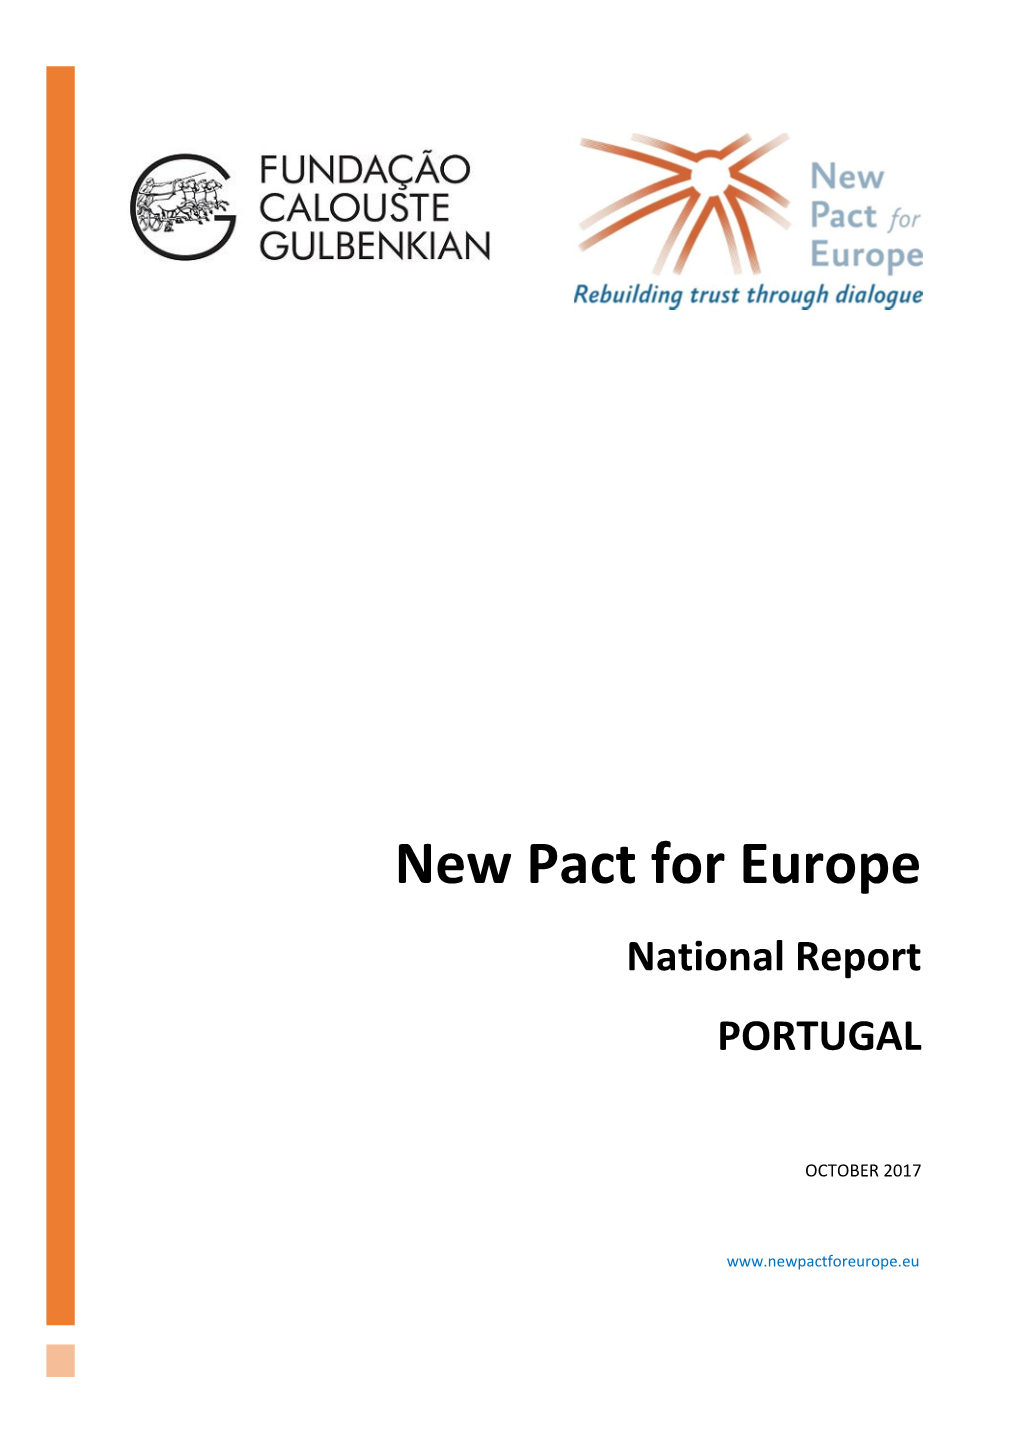 National Report PORTUGAL